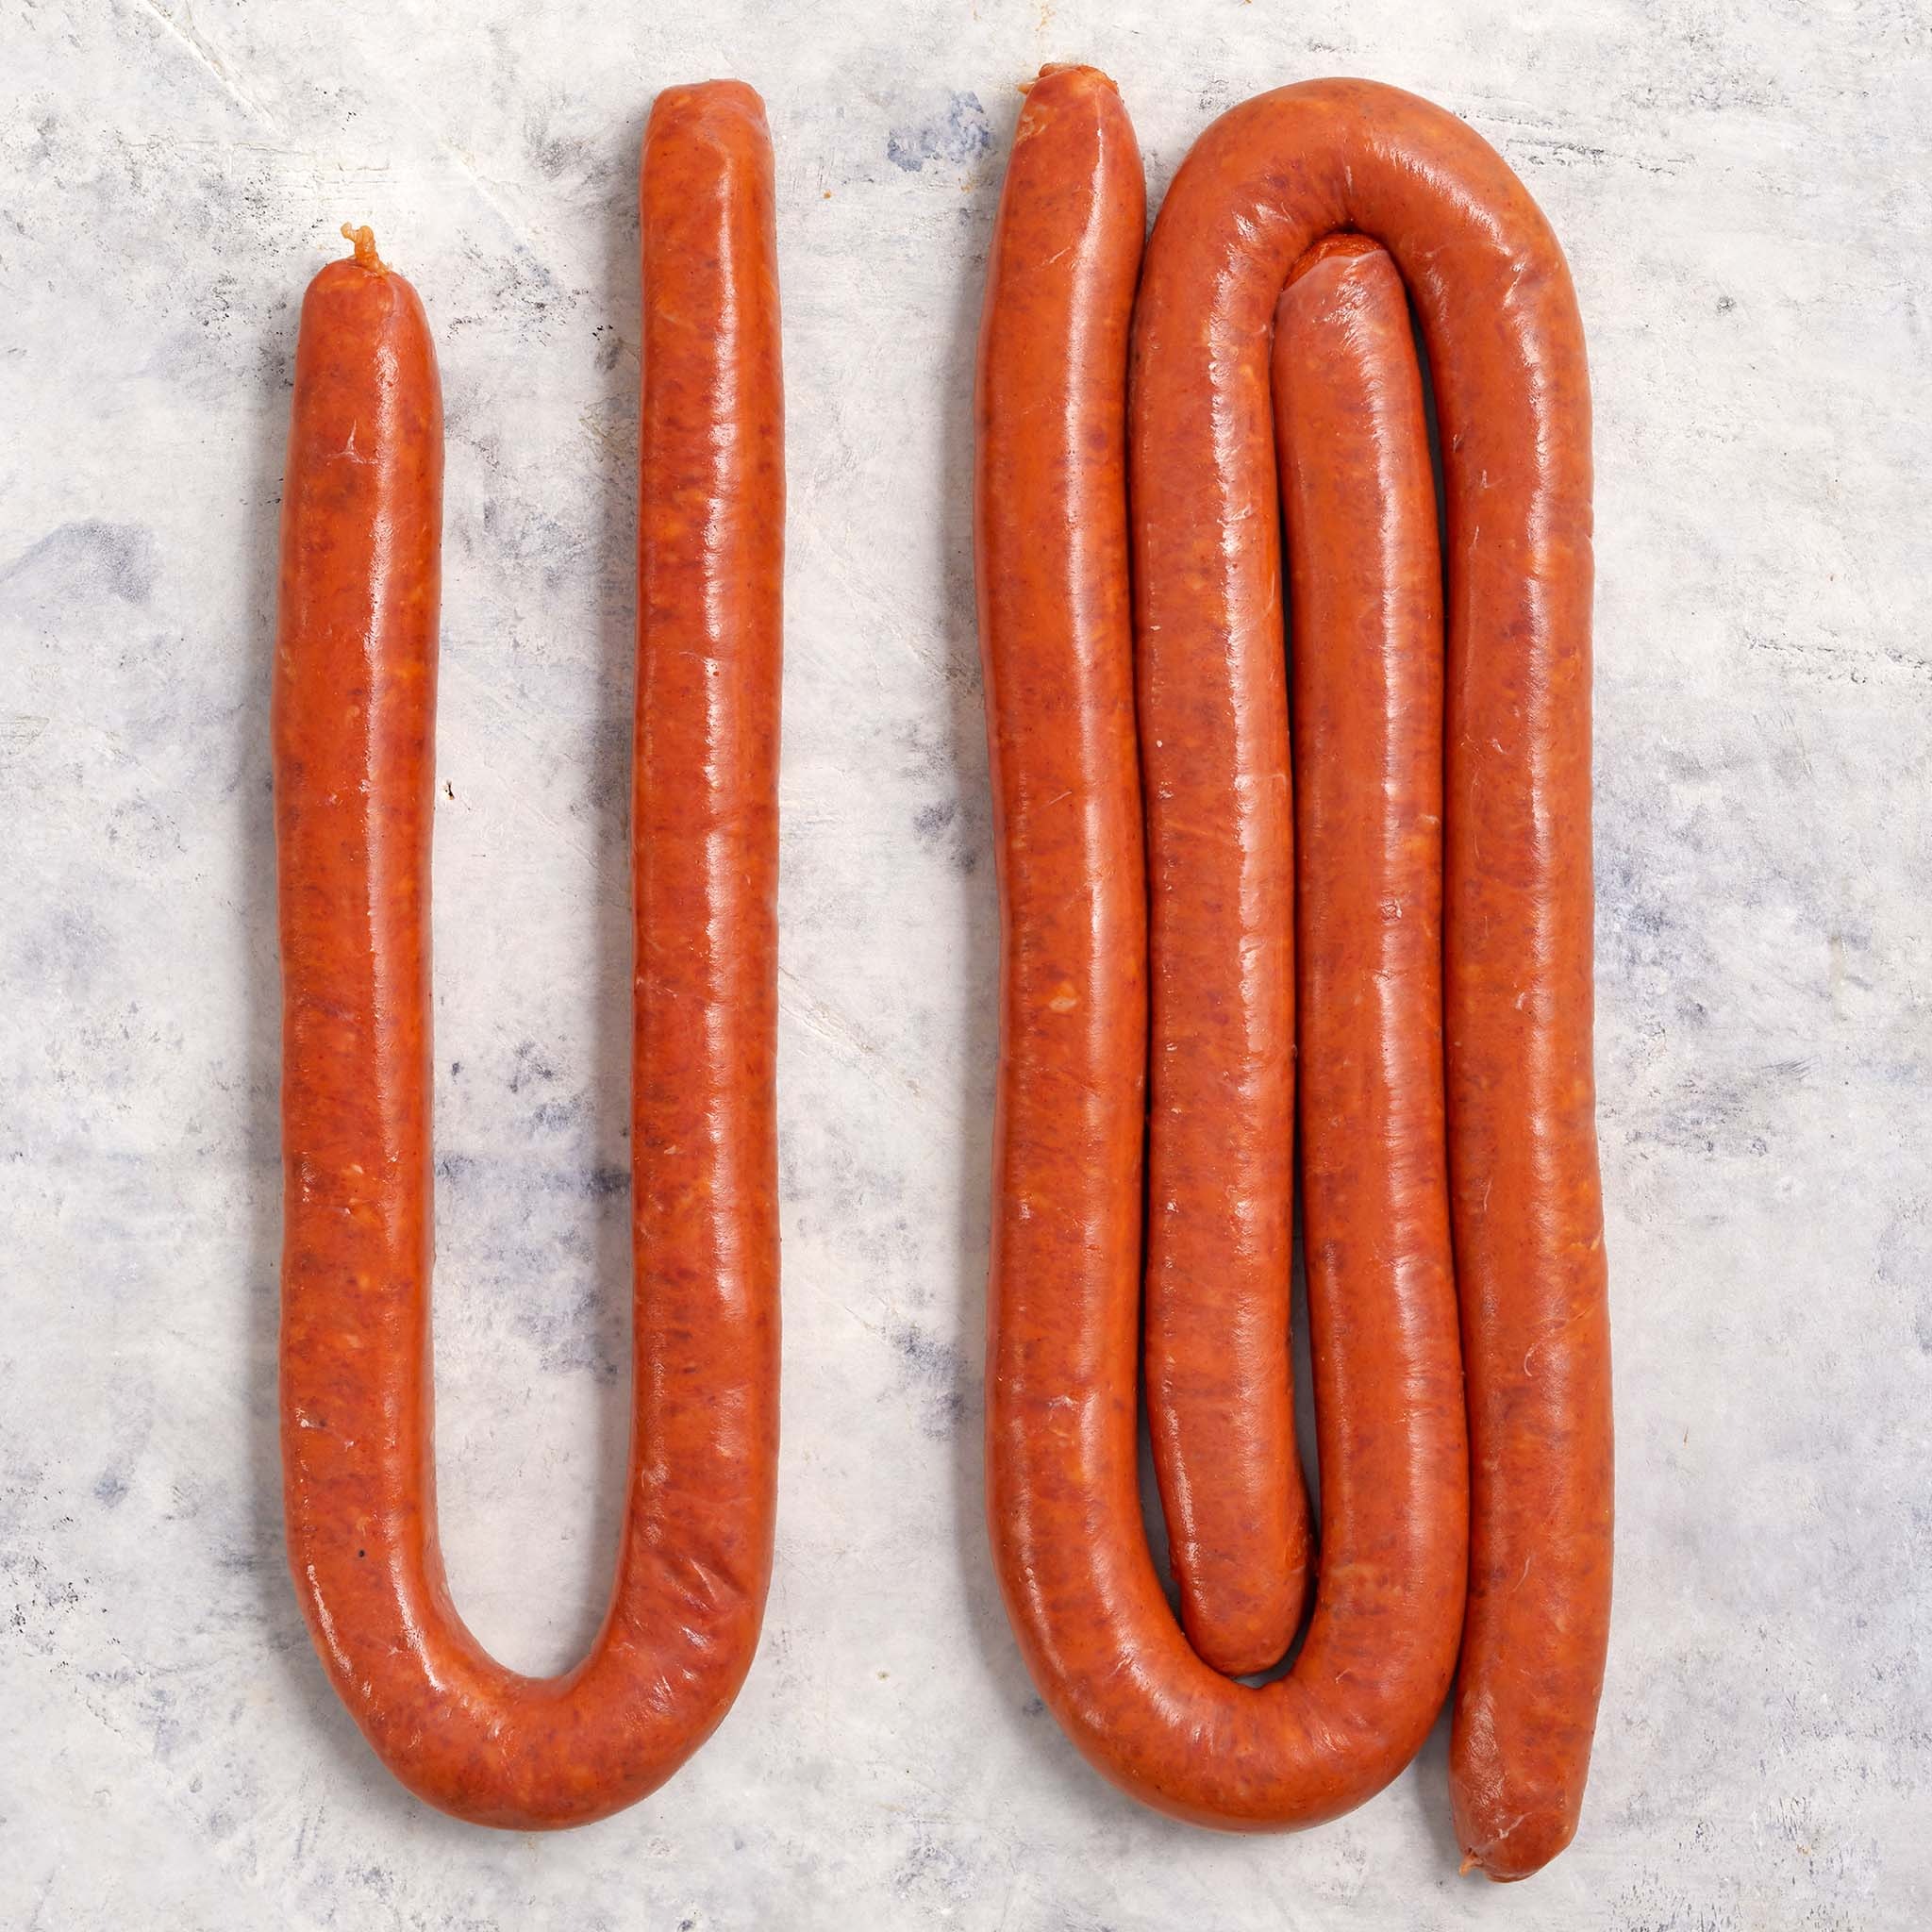 3746 WF RAW uncured spanish style chistorra Sausages